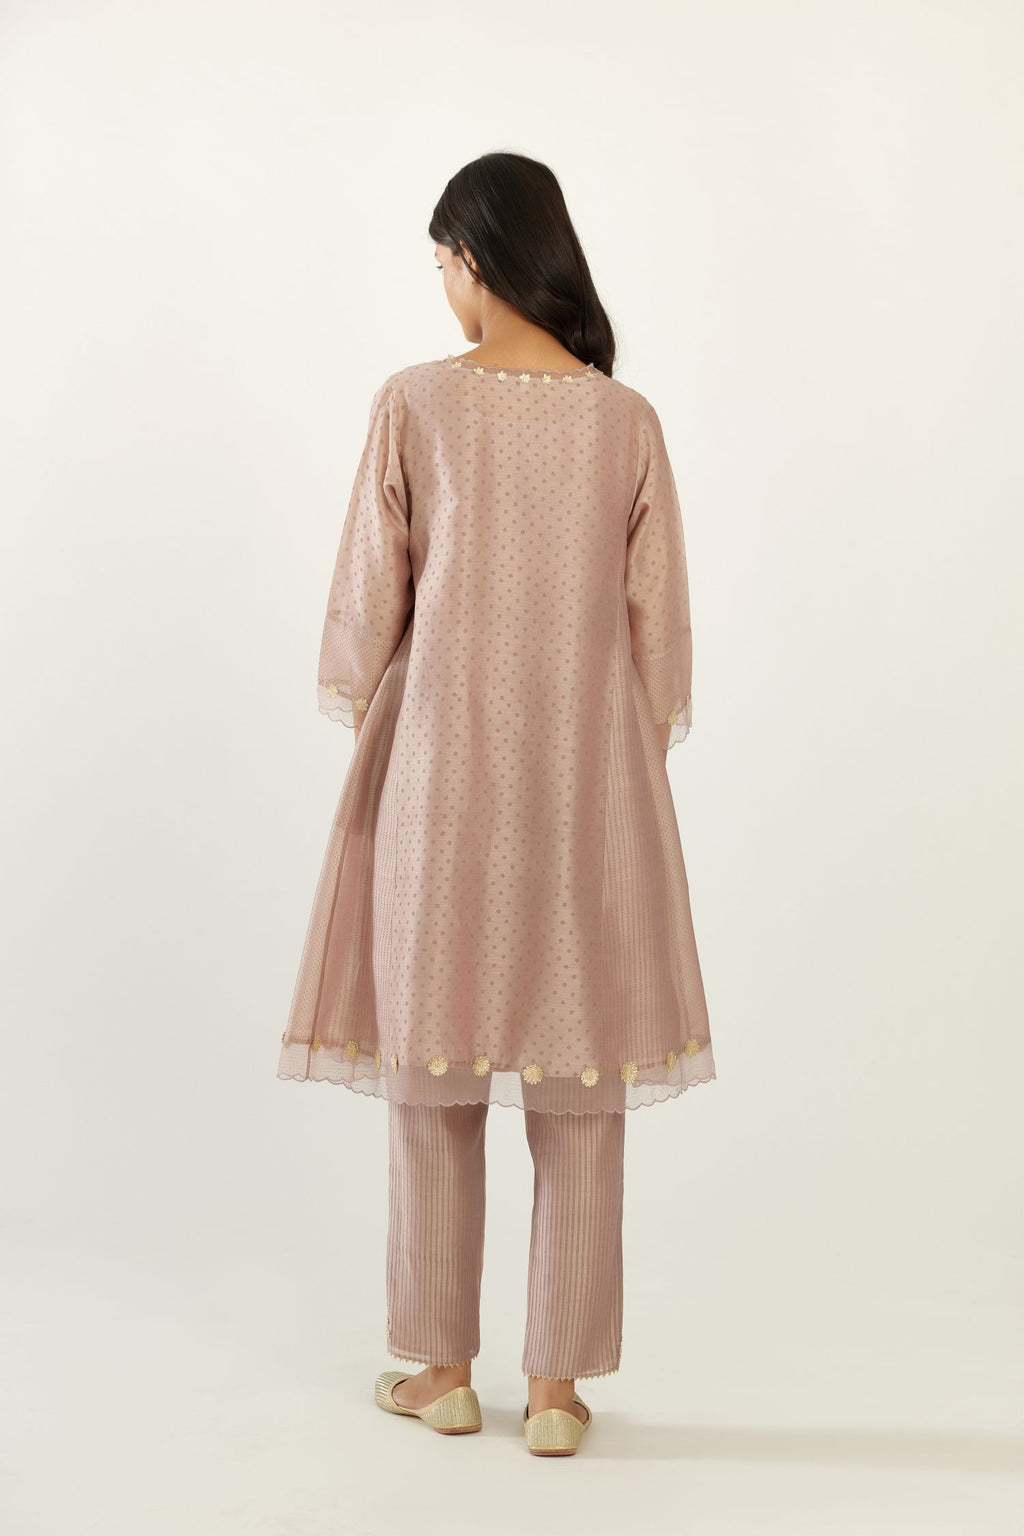 Lilac hand block printed silk chanderi easy fit short kurta set, highlighted with gota flower and scalloped organza at edges.